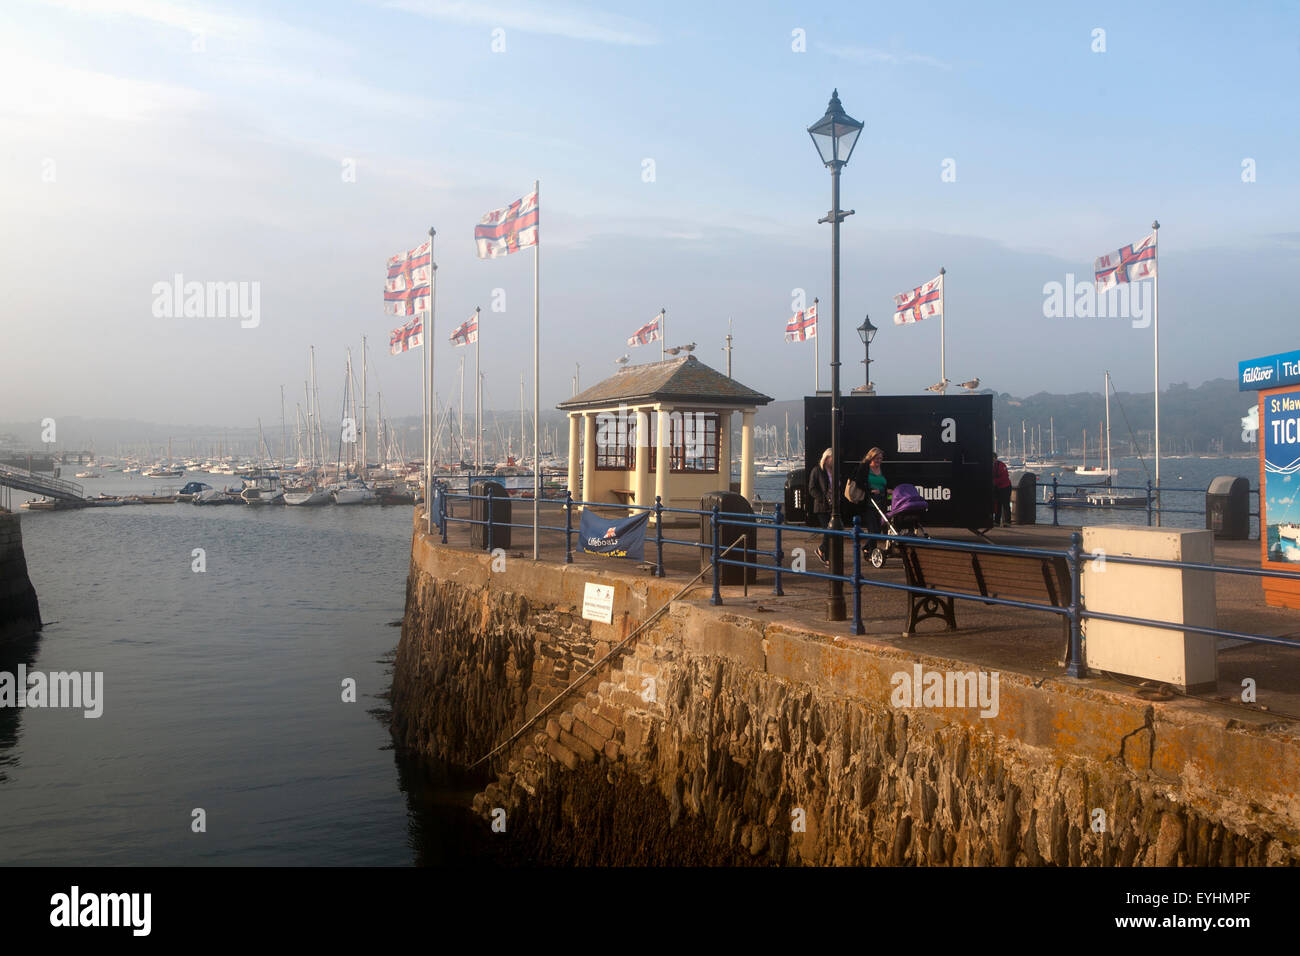 RNLI Fahnen im Wind am Prince Of Wales Pier, Falmouth, Cornwall, England, UK Stockfoto